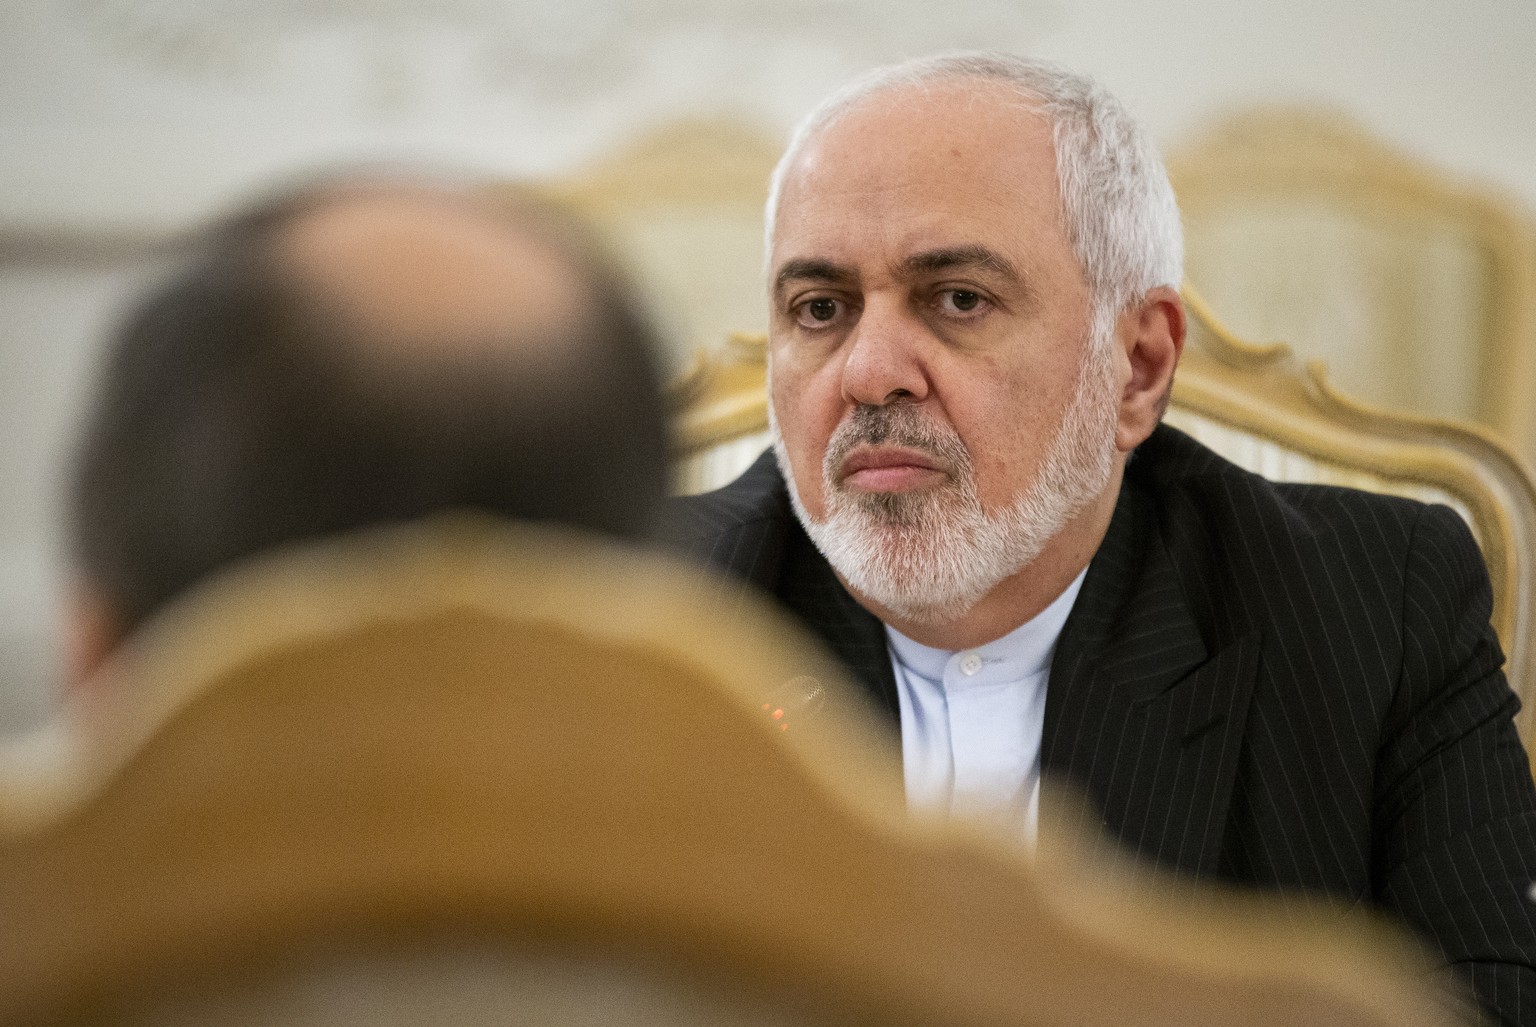 Iranian Foreign Minister Mohammad Javad Zarif listens to Russian Foreign Minister Sergey Lavrov during their talks in Moscow, Russia, Monday, Dec. 30, 2019. (AP Photo/Alexander Zemlianichenko)
Mohamma ...